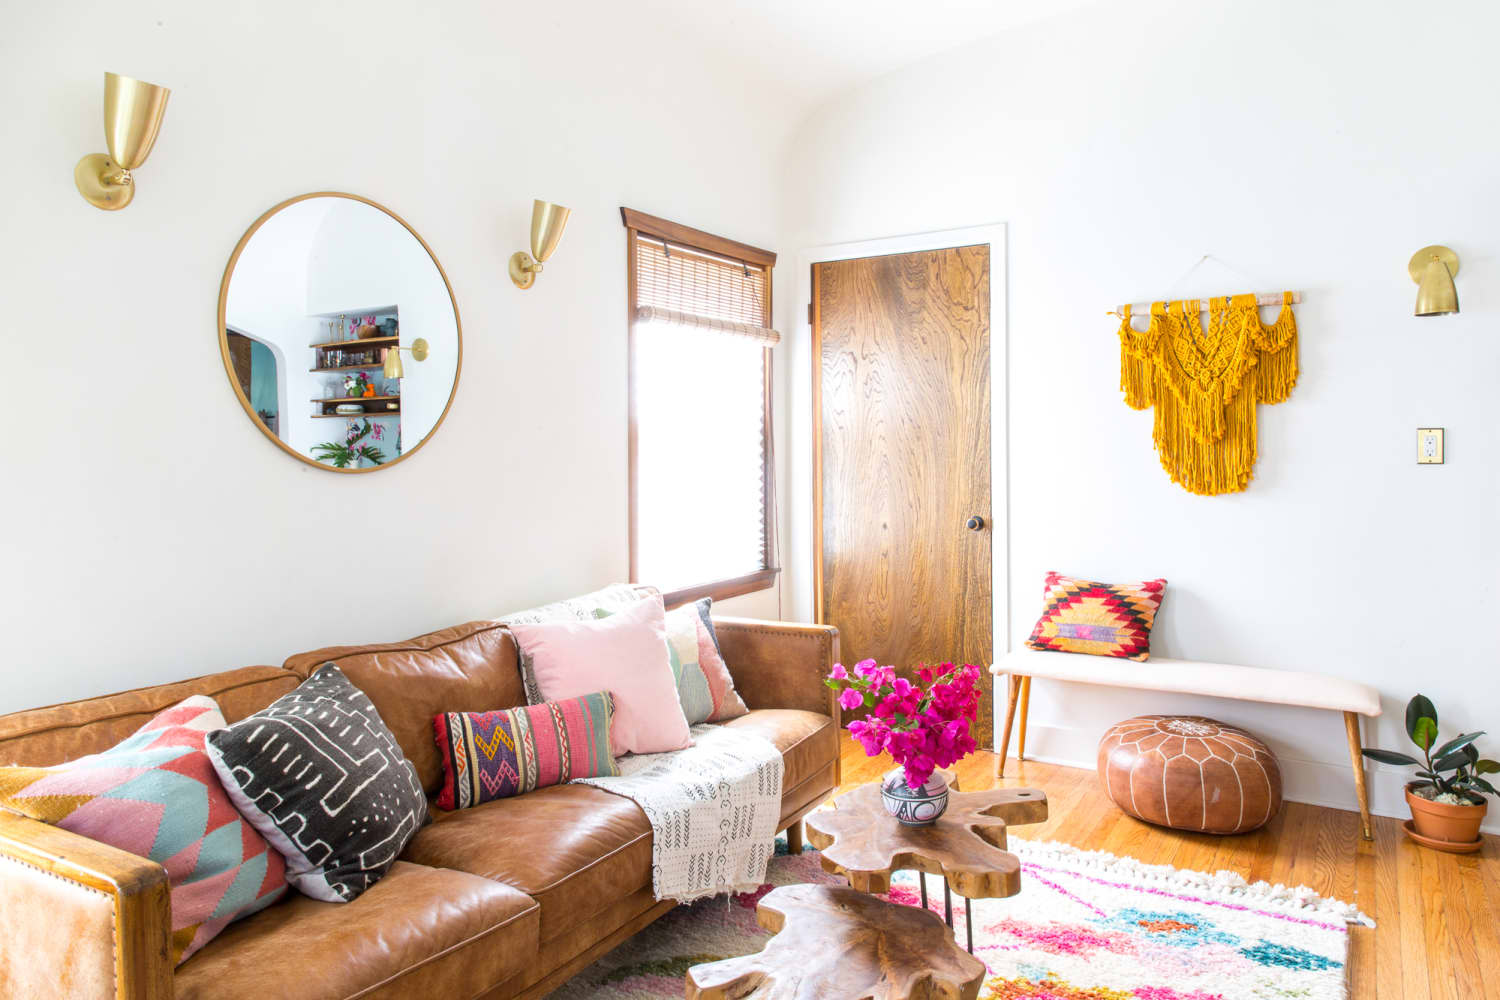 Throw Pillows & Blankets To Accent A Brown Couch 